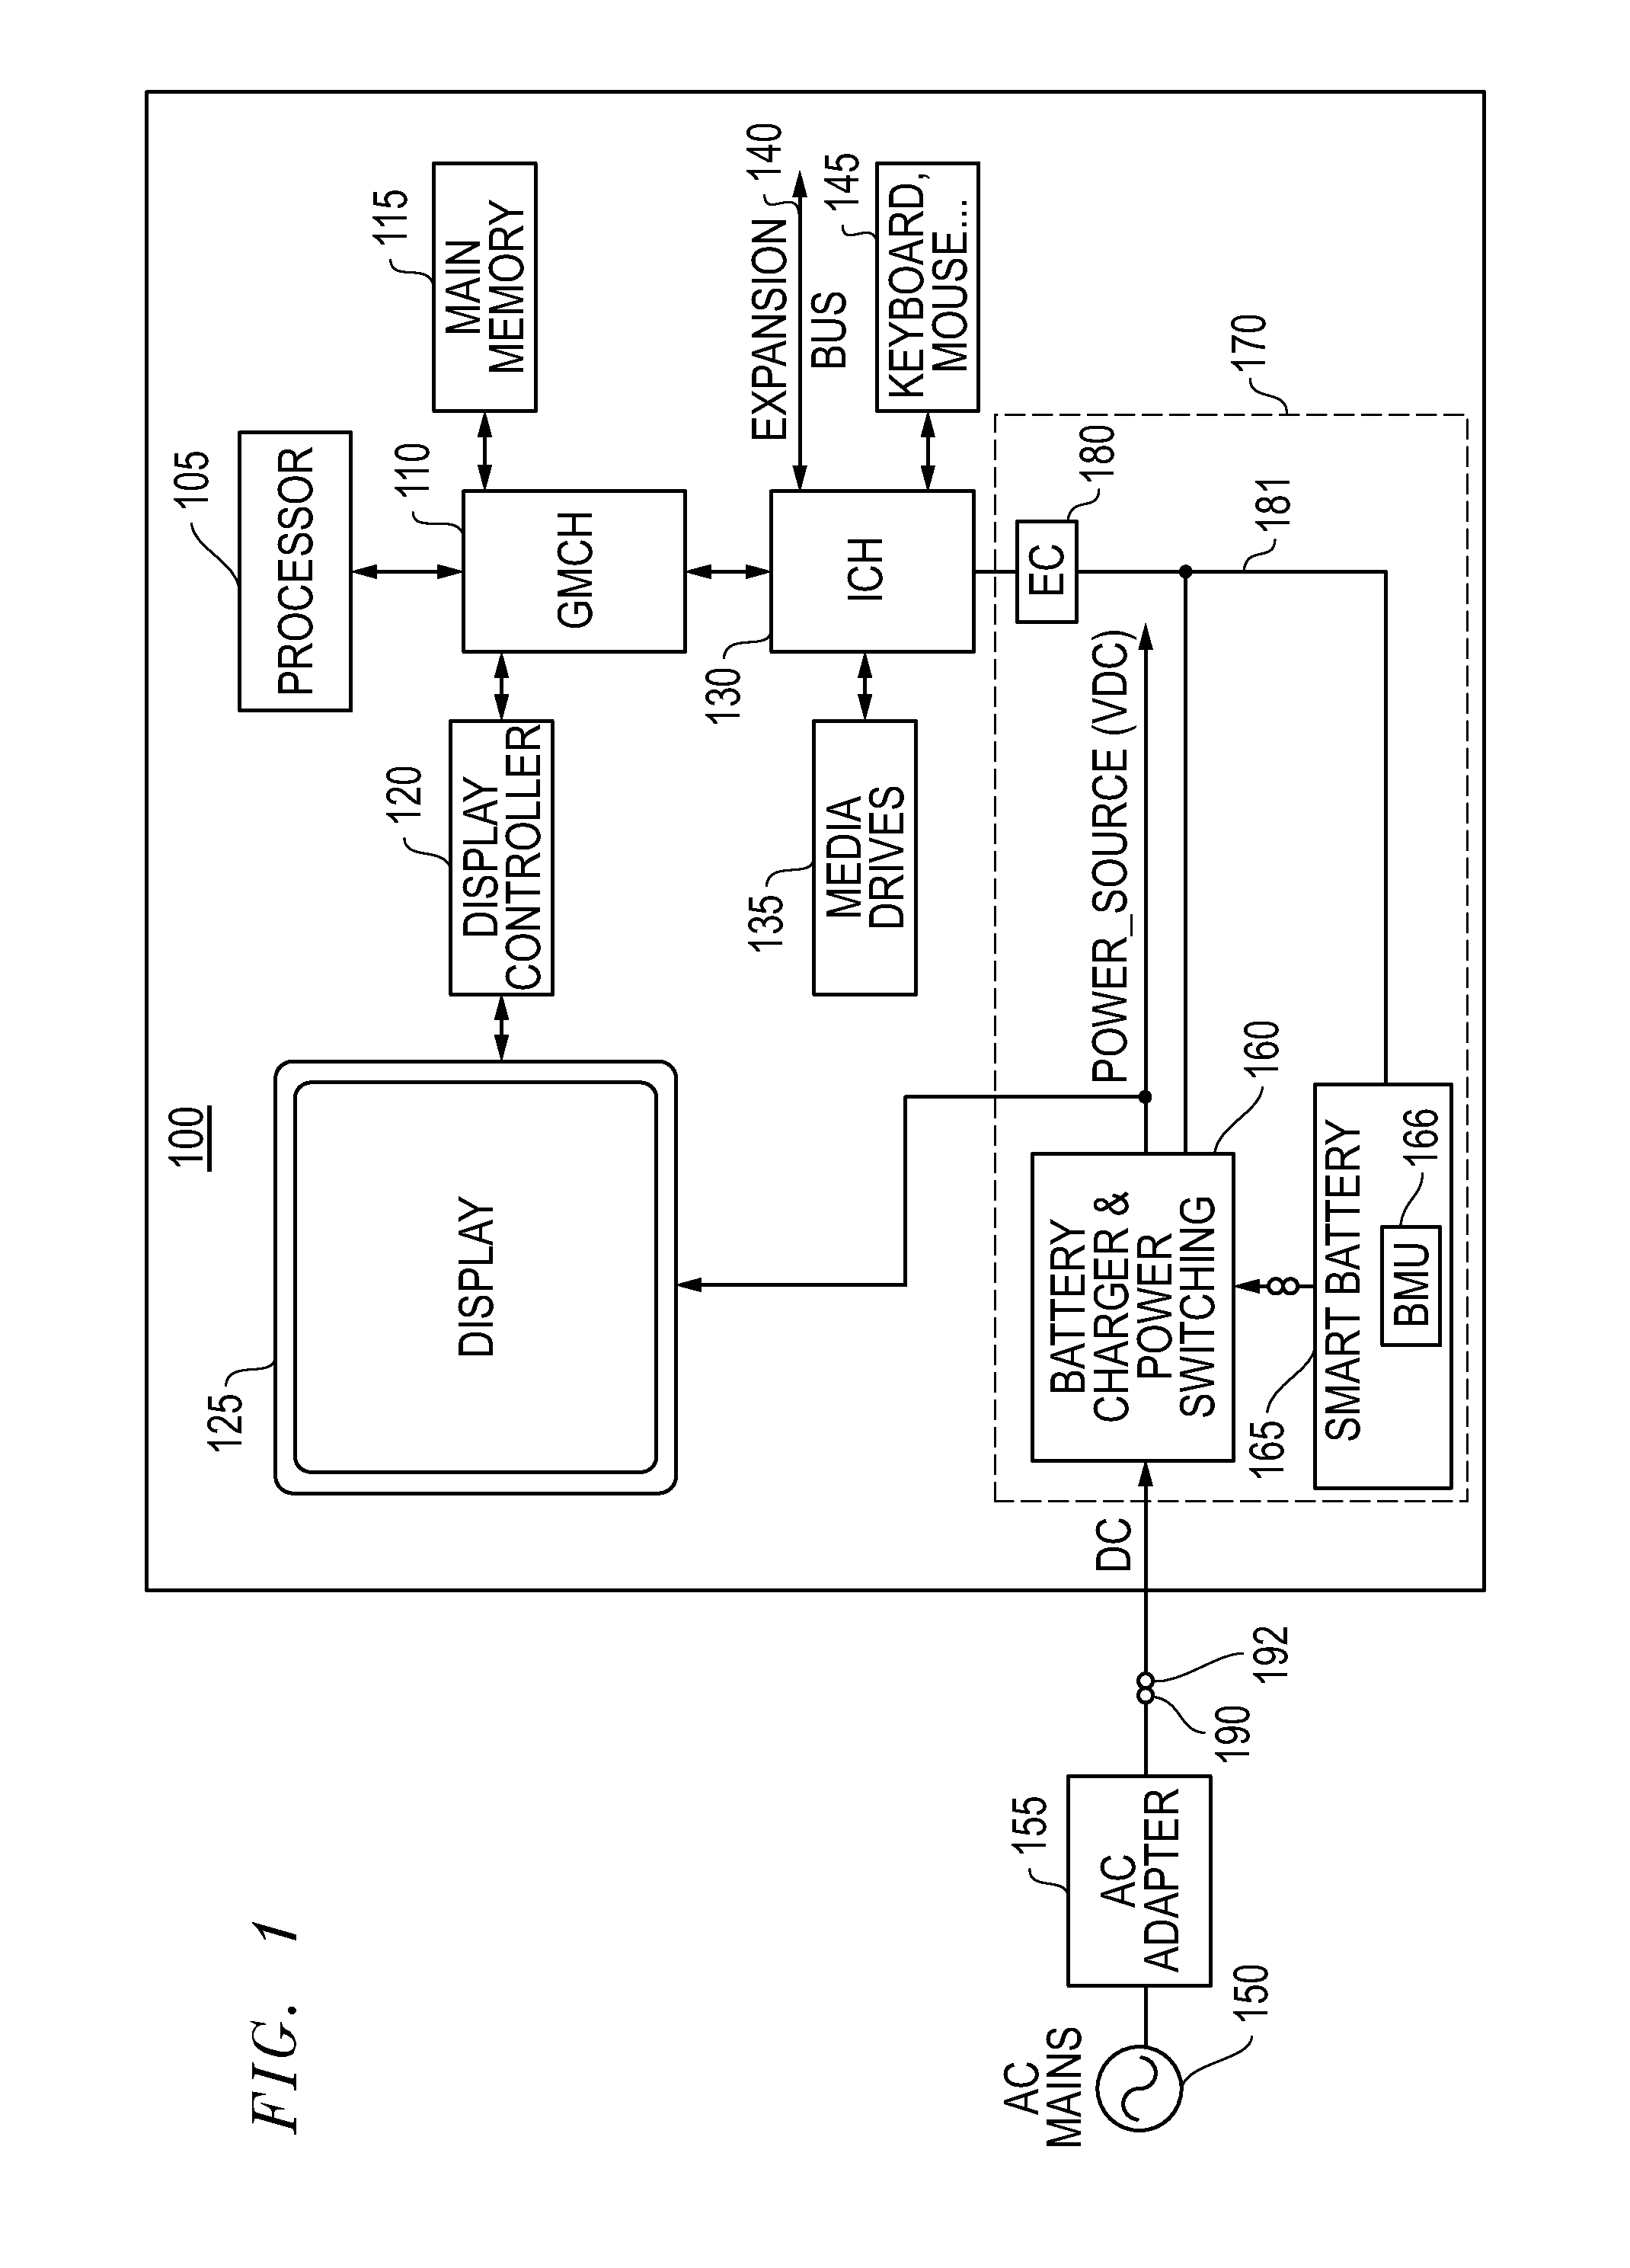 Systems and methods for providing supplemental power to battery powered information handling systems